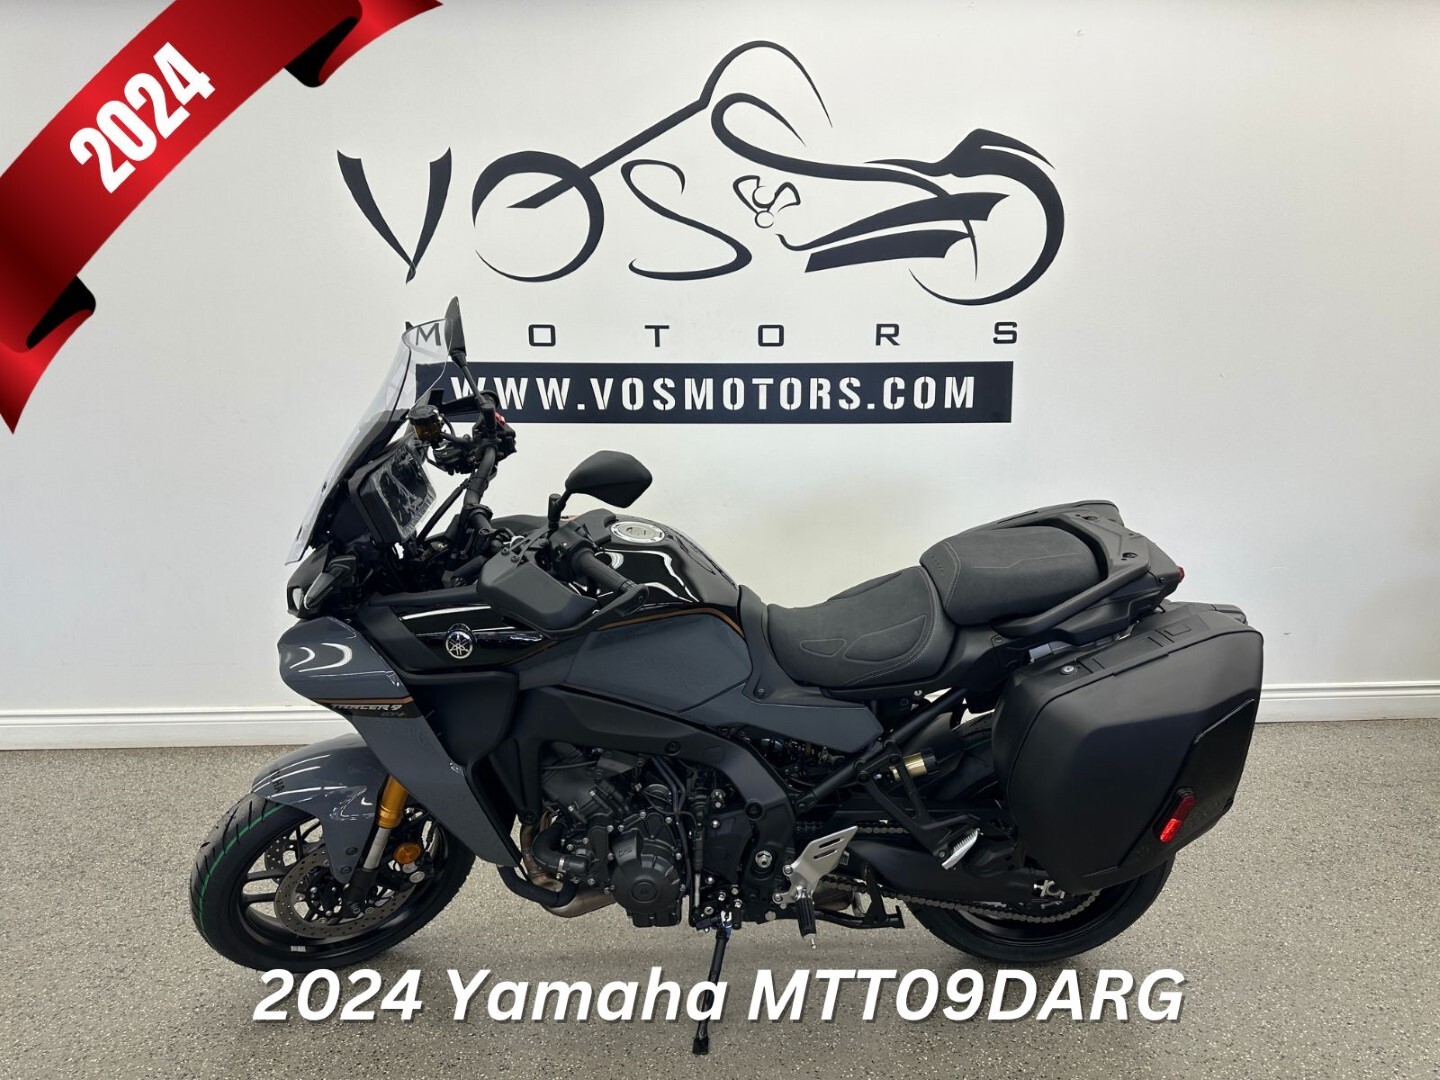 2024 Yamaha MTT09DARG Tracer 900GT - V6029 - -No Payments for 1 Year**